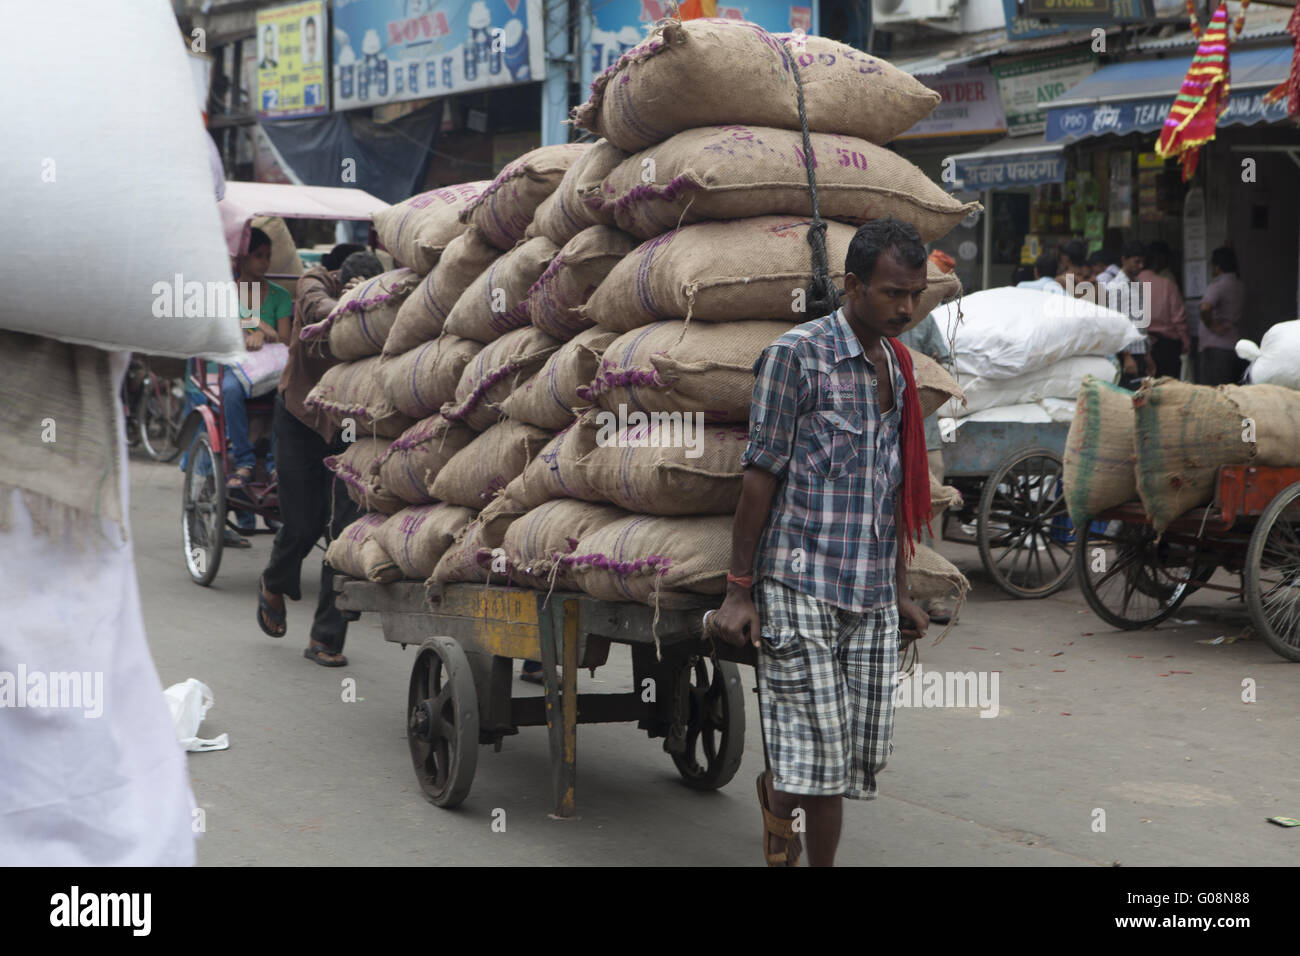 Indian carries packages on cart, Dehli, India Stock Photo